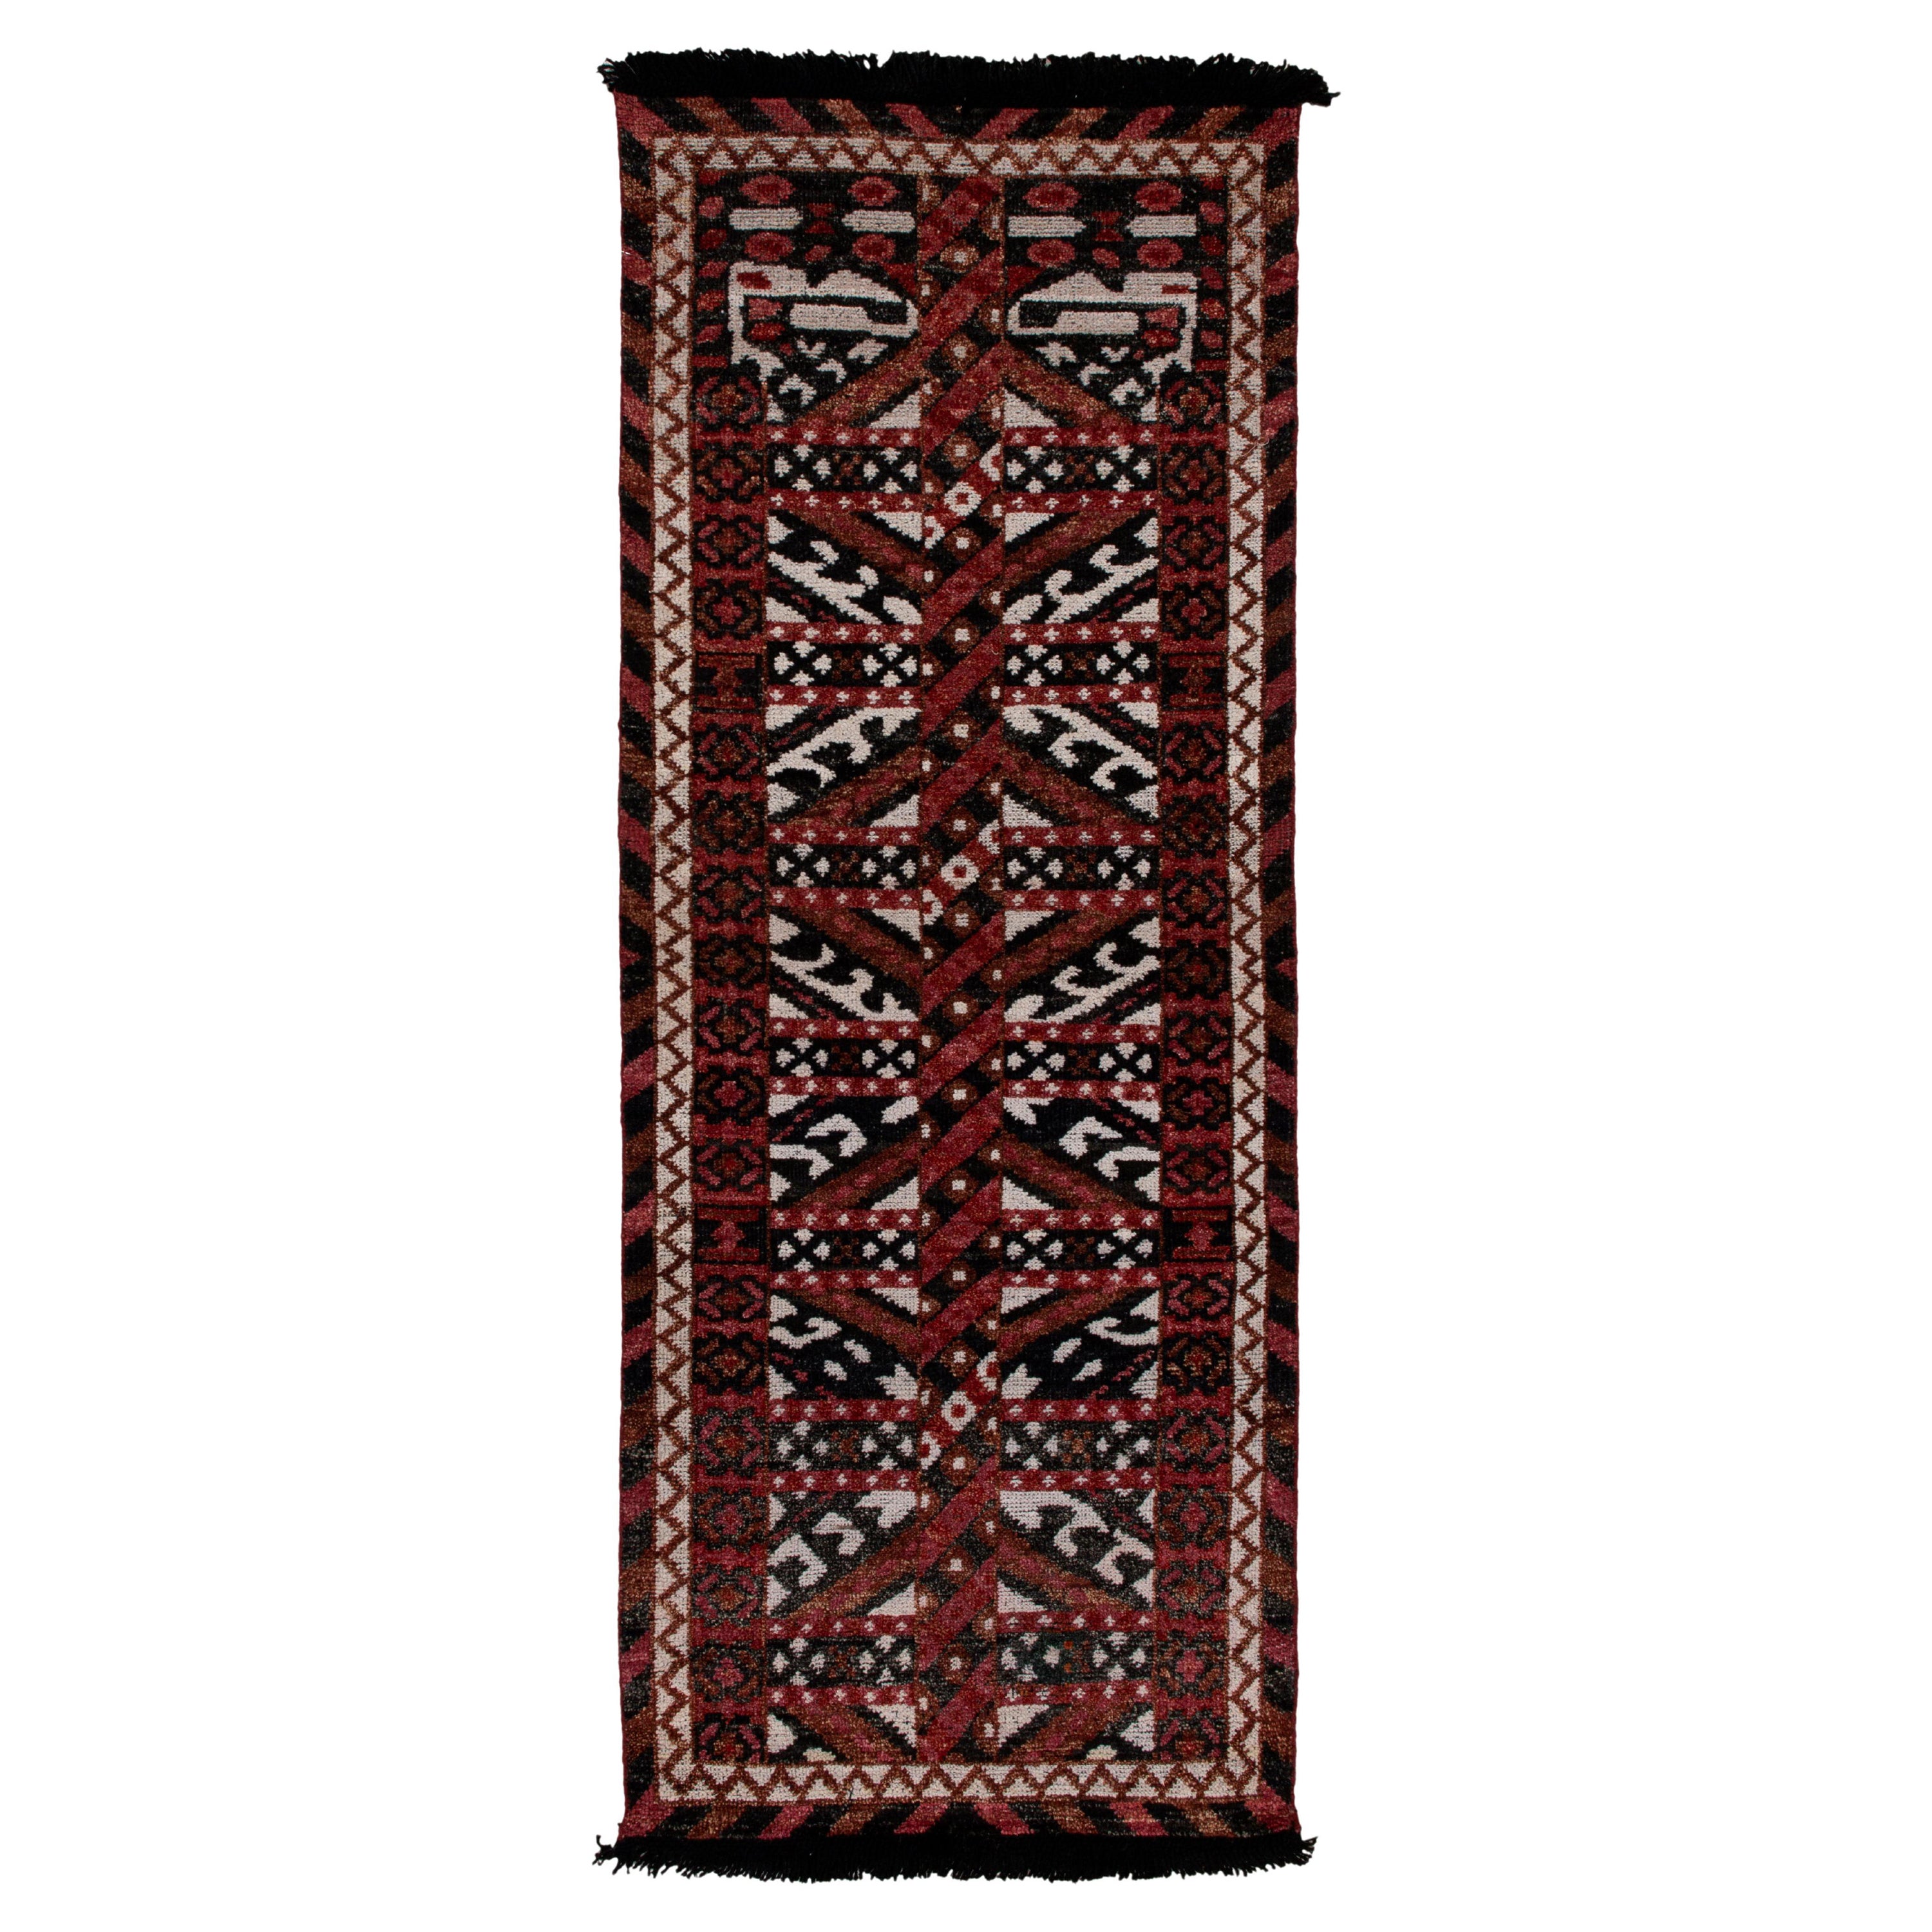 Rug & Kilim's Tribal Style Runner in Red, Black and White Geometric Pattern